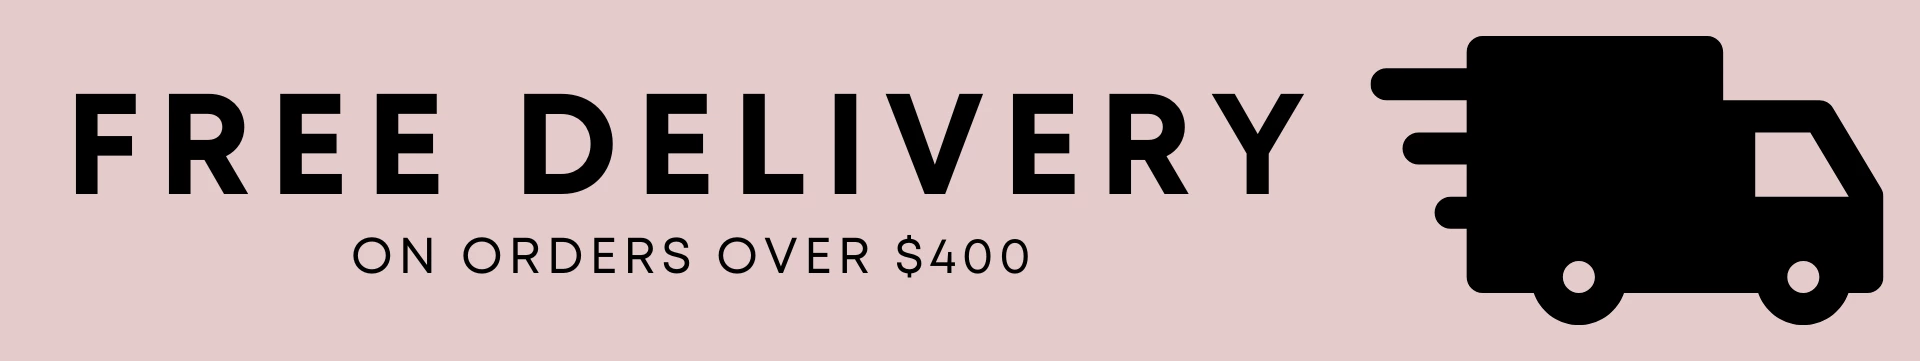 free delivery over $400